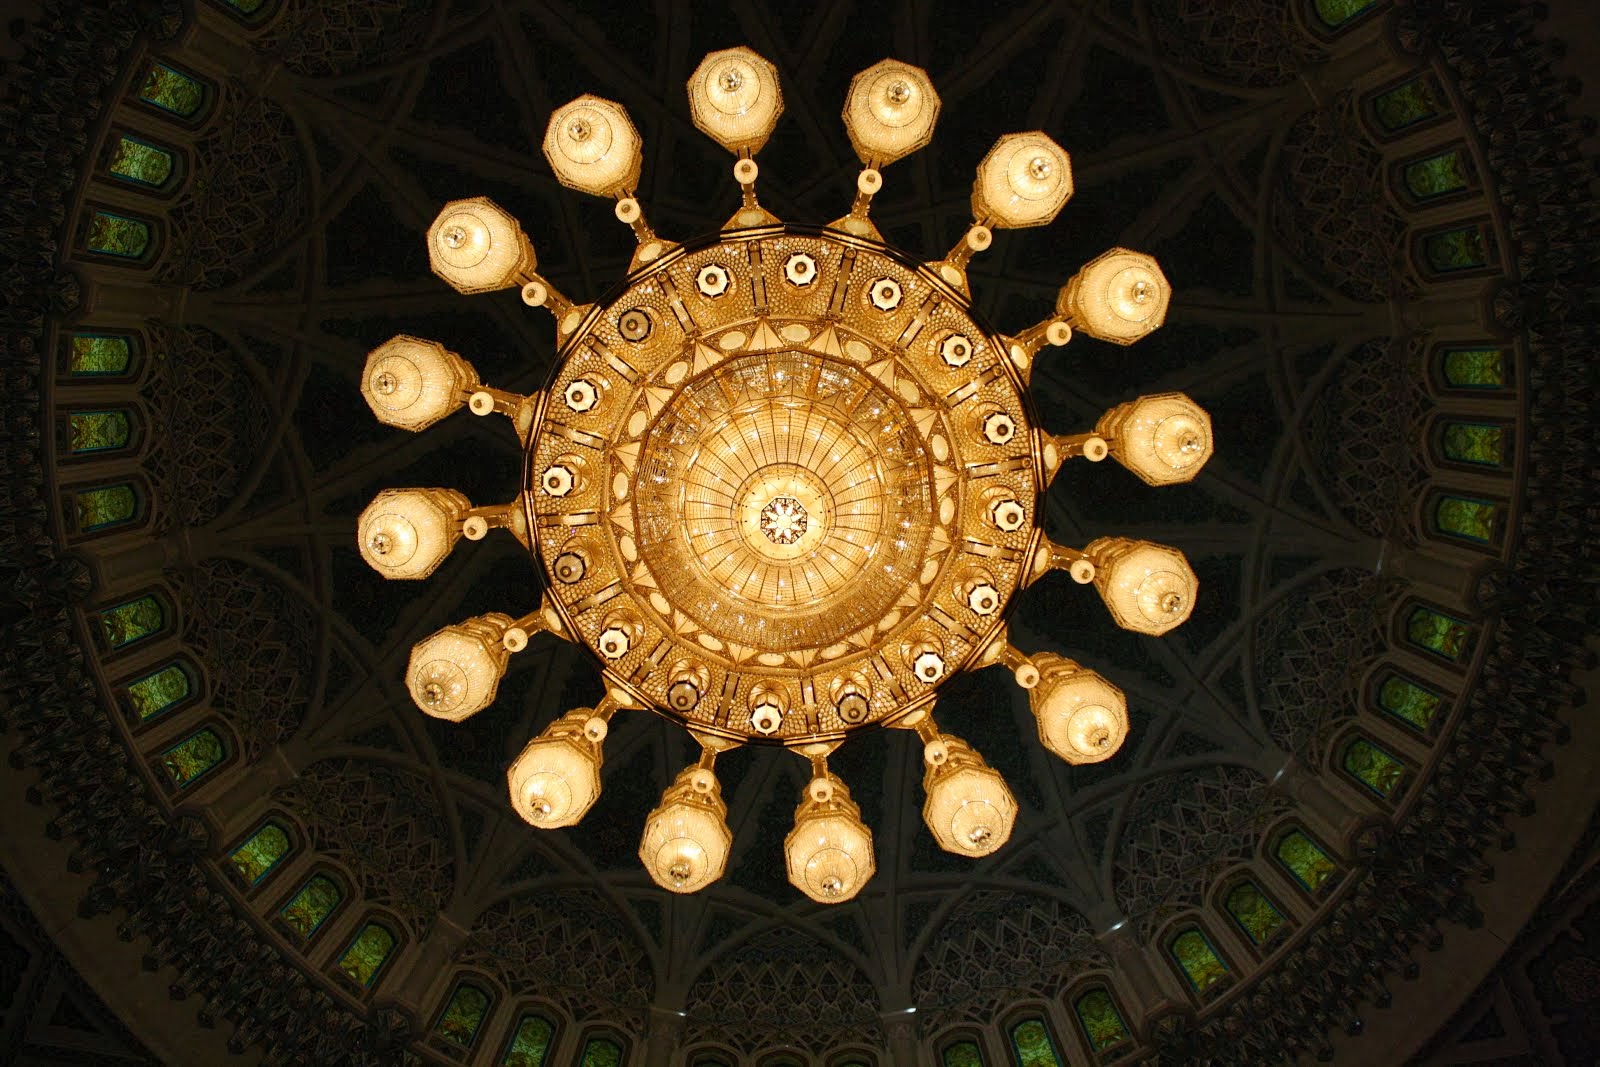 Chandelier in the Grand Mosque